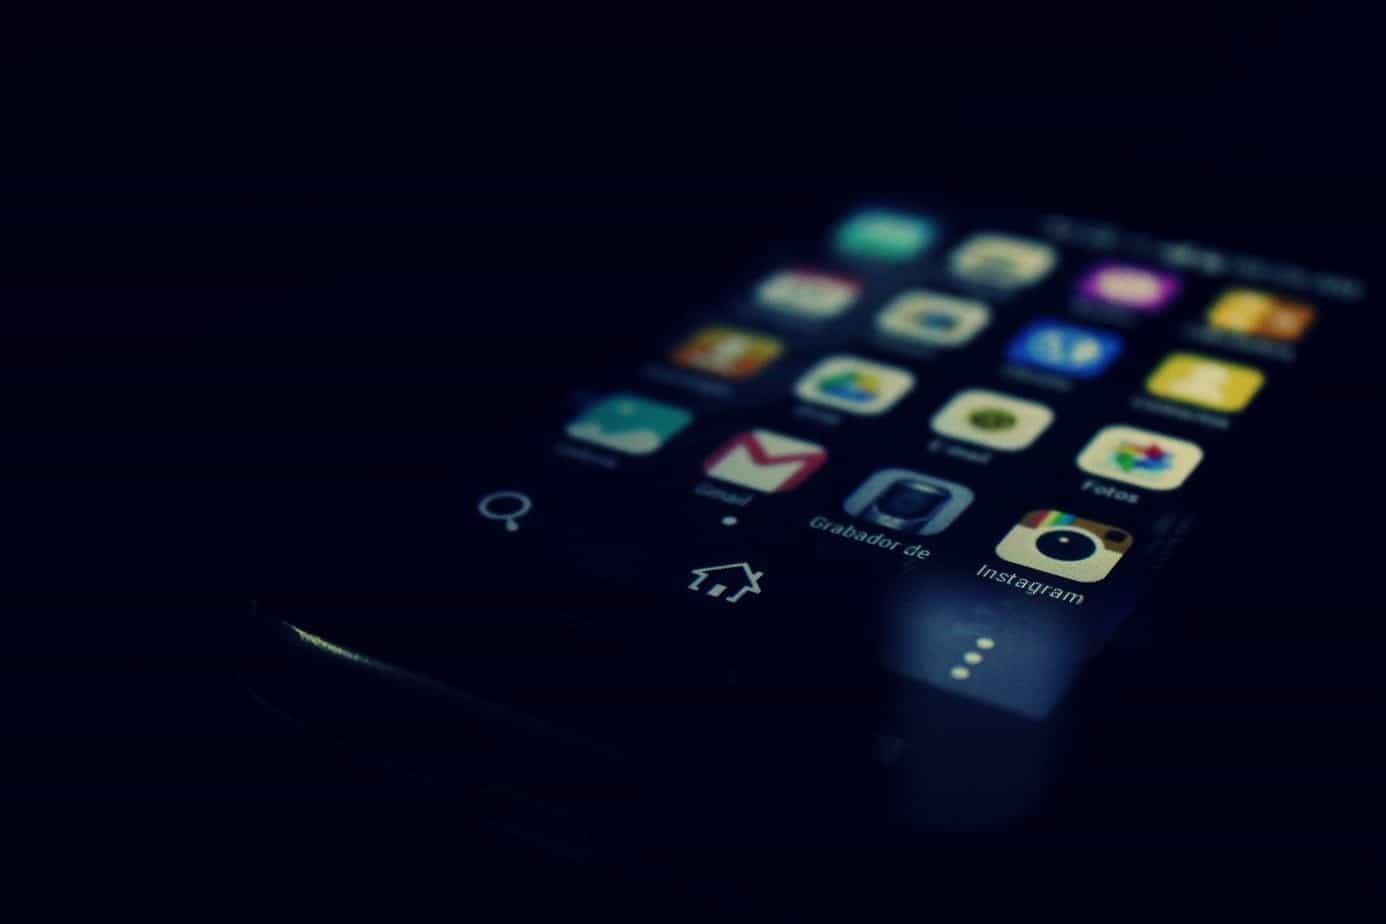 How to change black background to white on Android devices - PC Guide